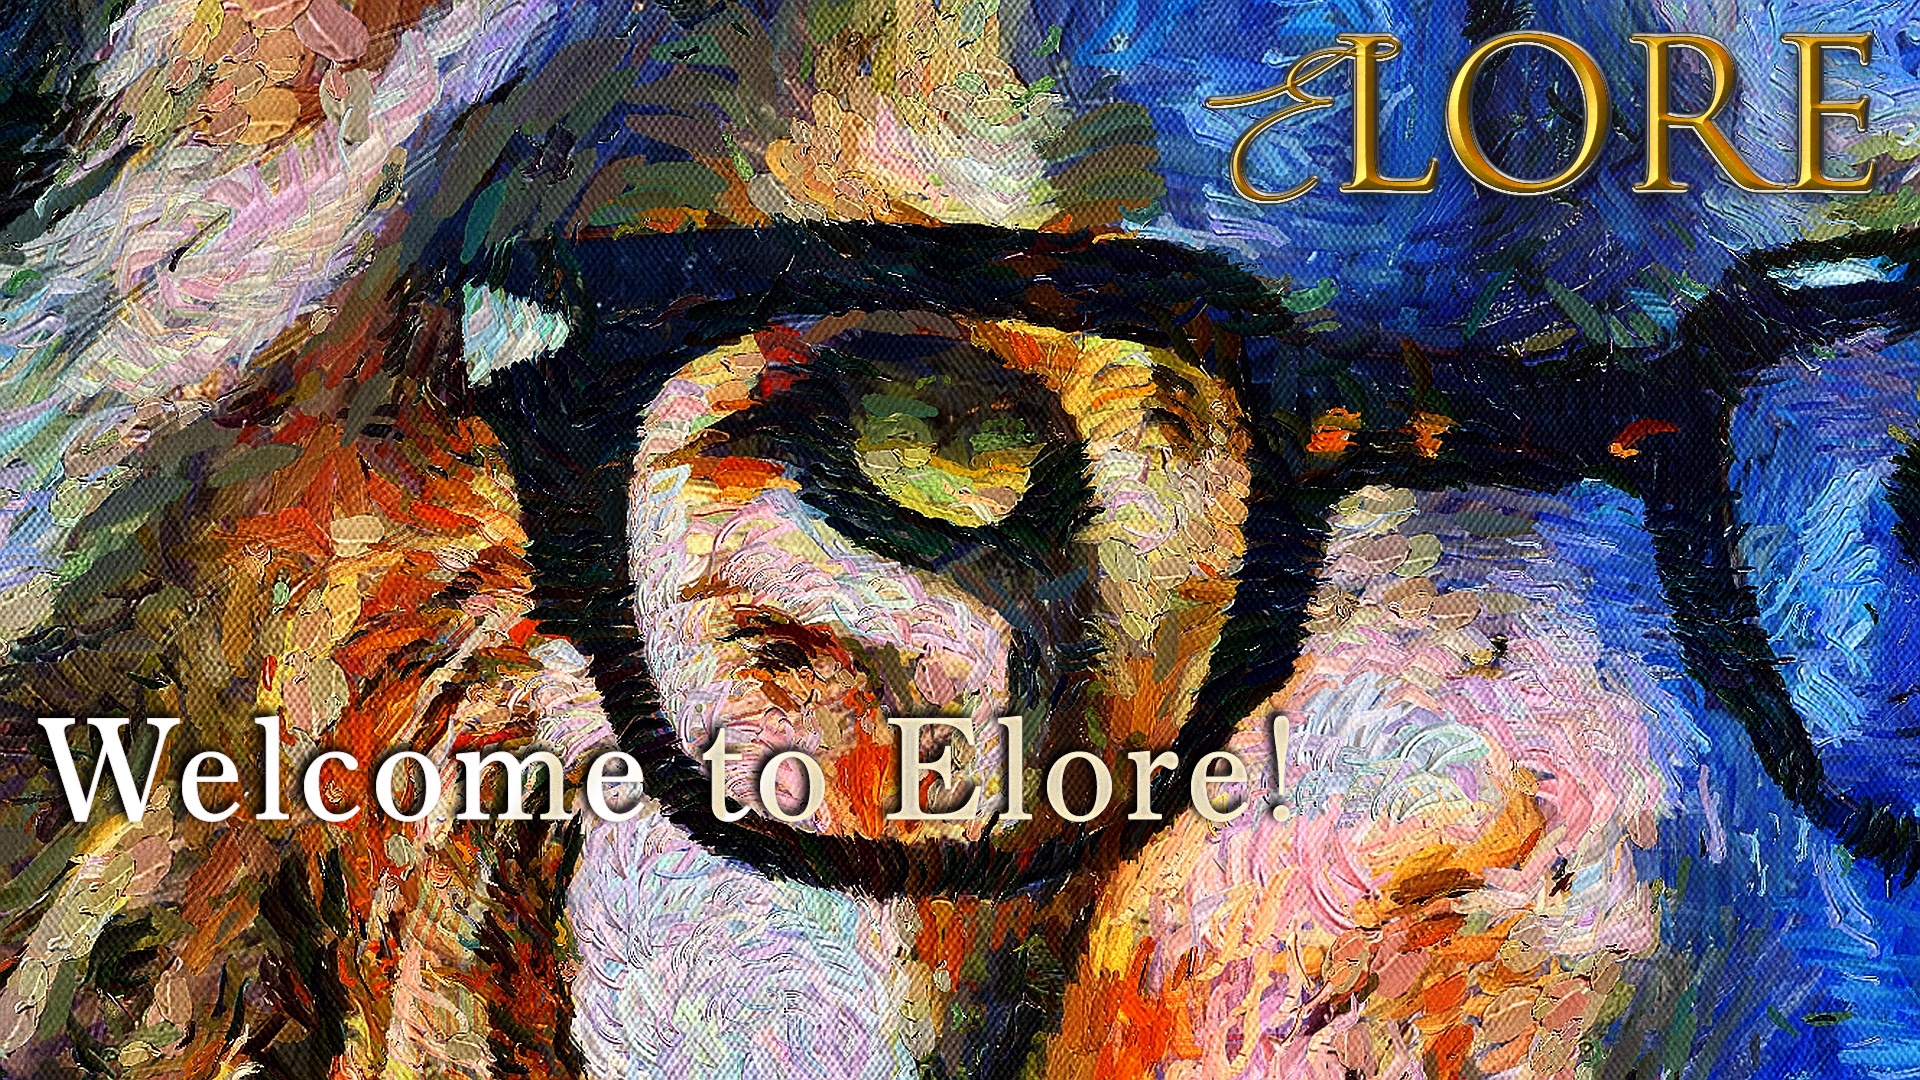 Elore - For Those Who Live to Learn